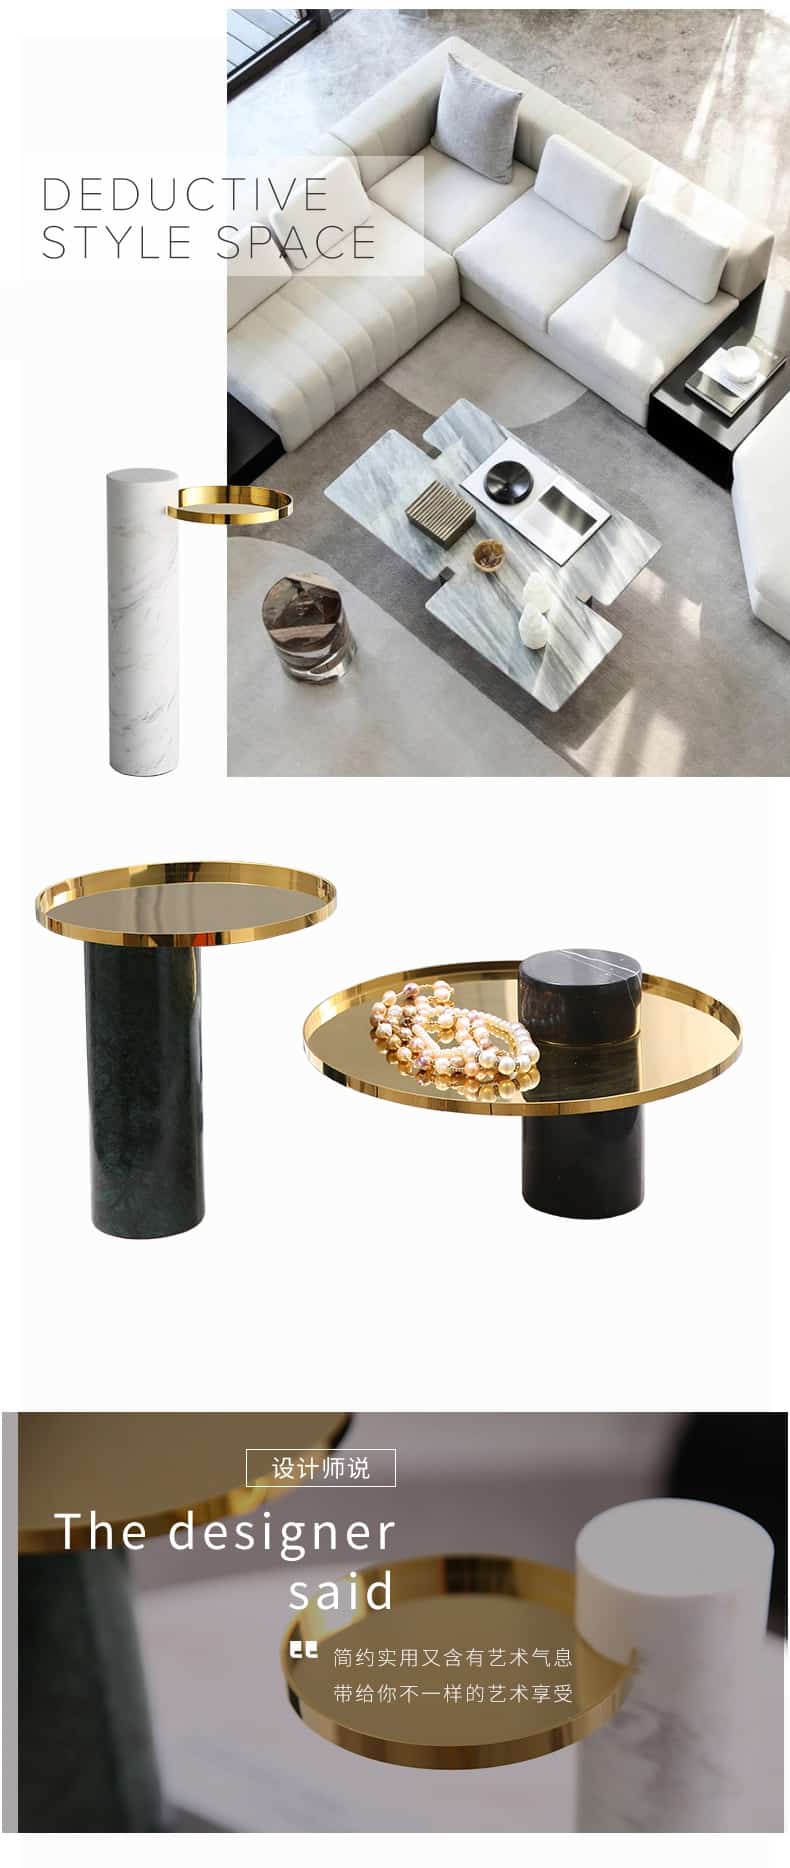 Luxury Home Hotel Living Room Coffee Table Decoration Ornament Modern Black Green White Cylindrical Marble Metal Tray Storage